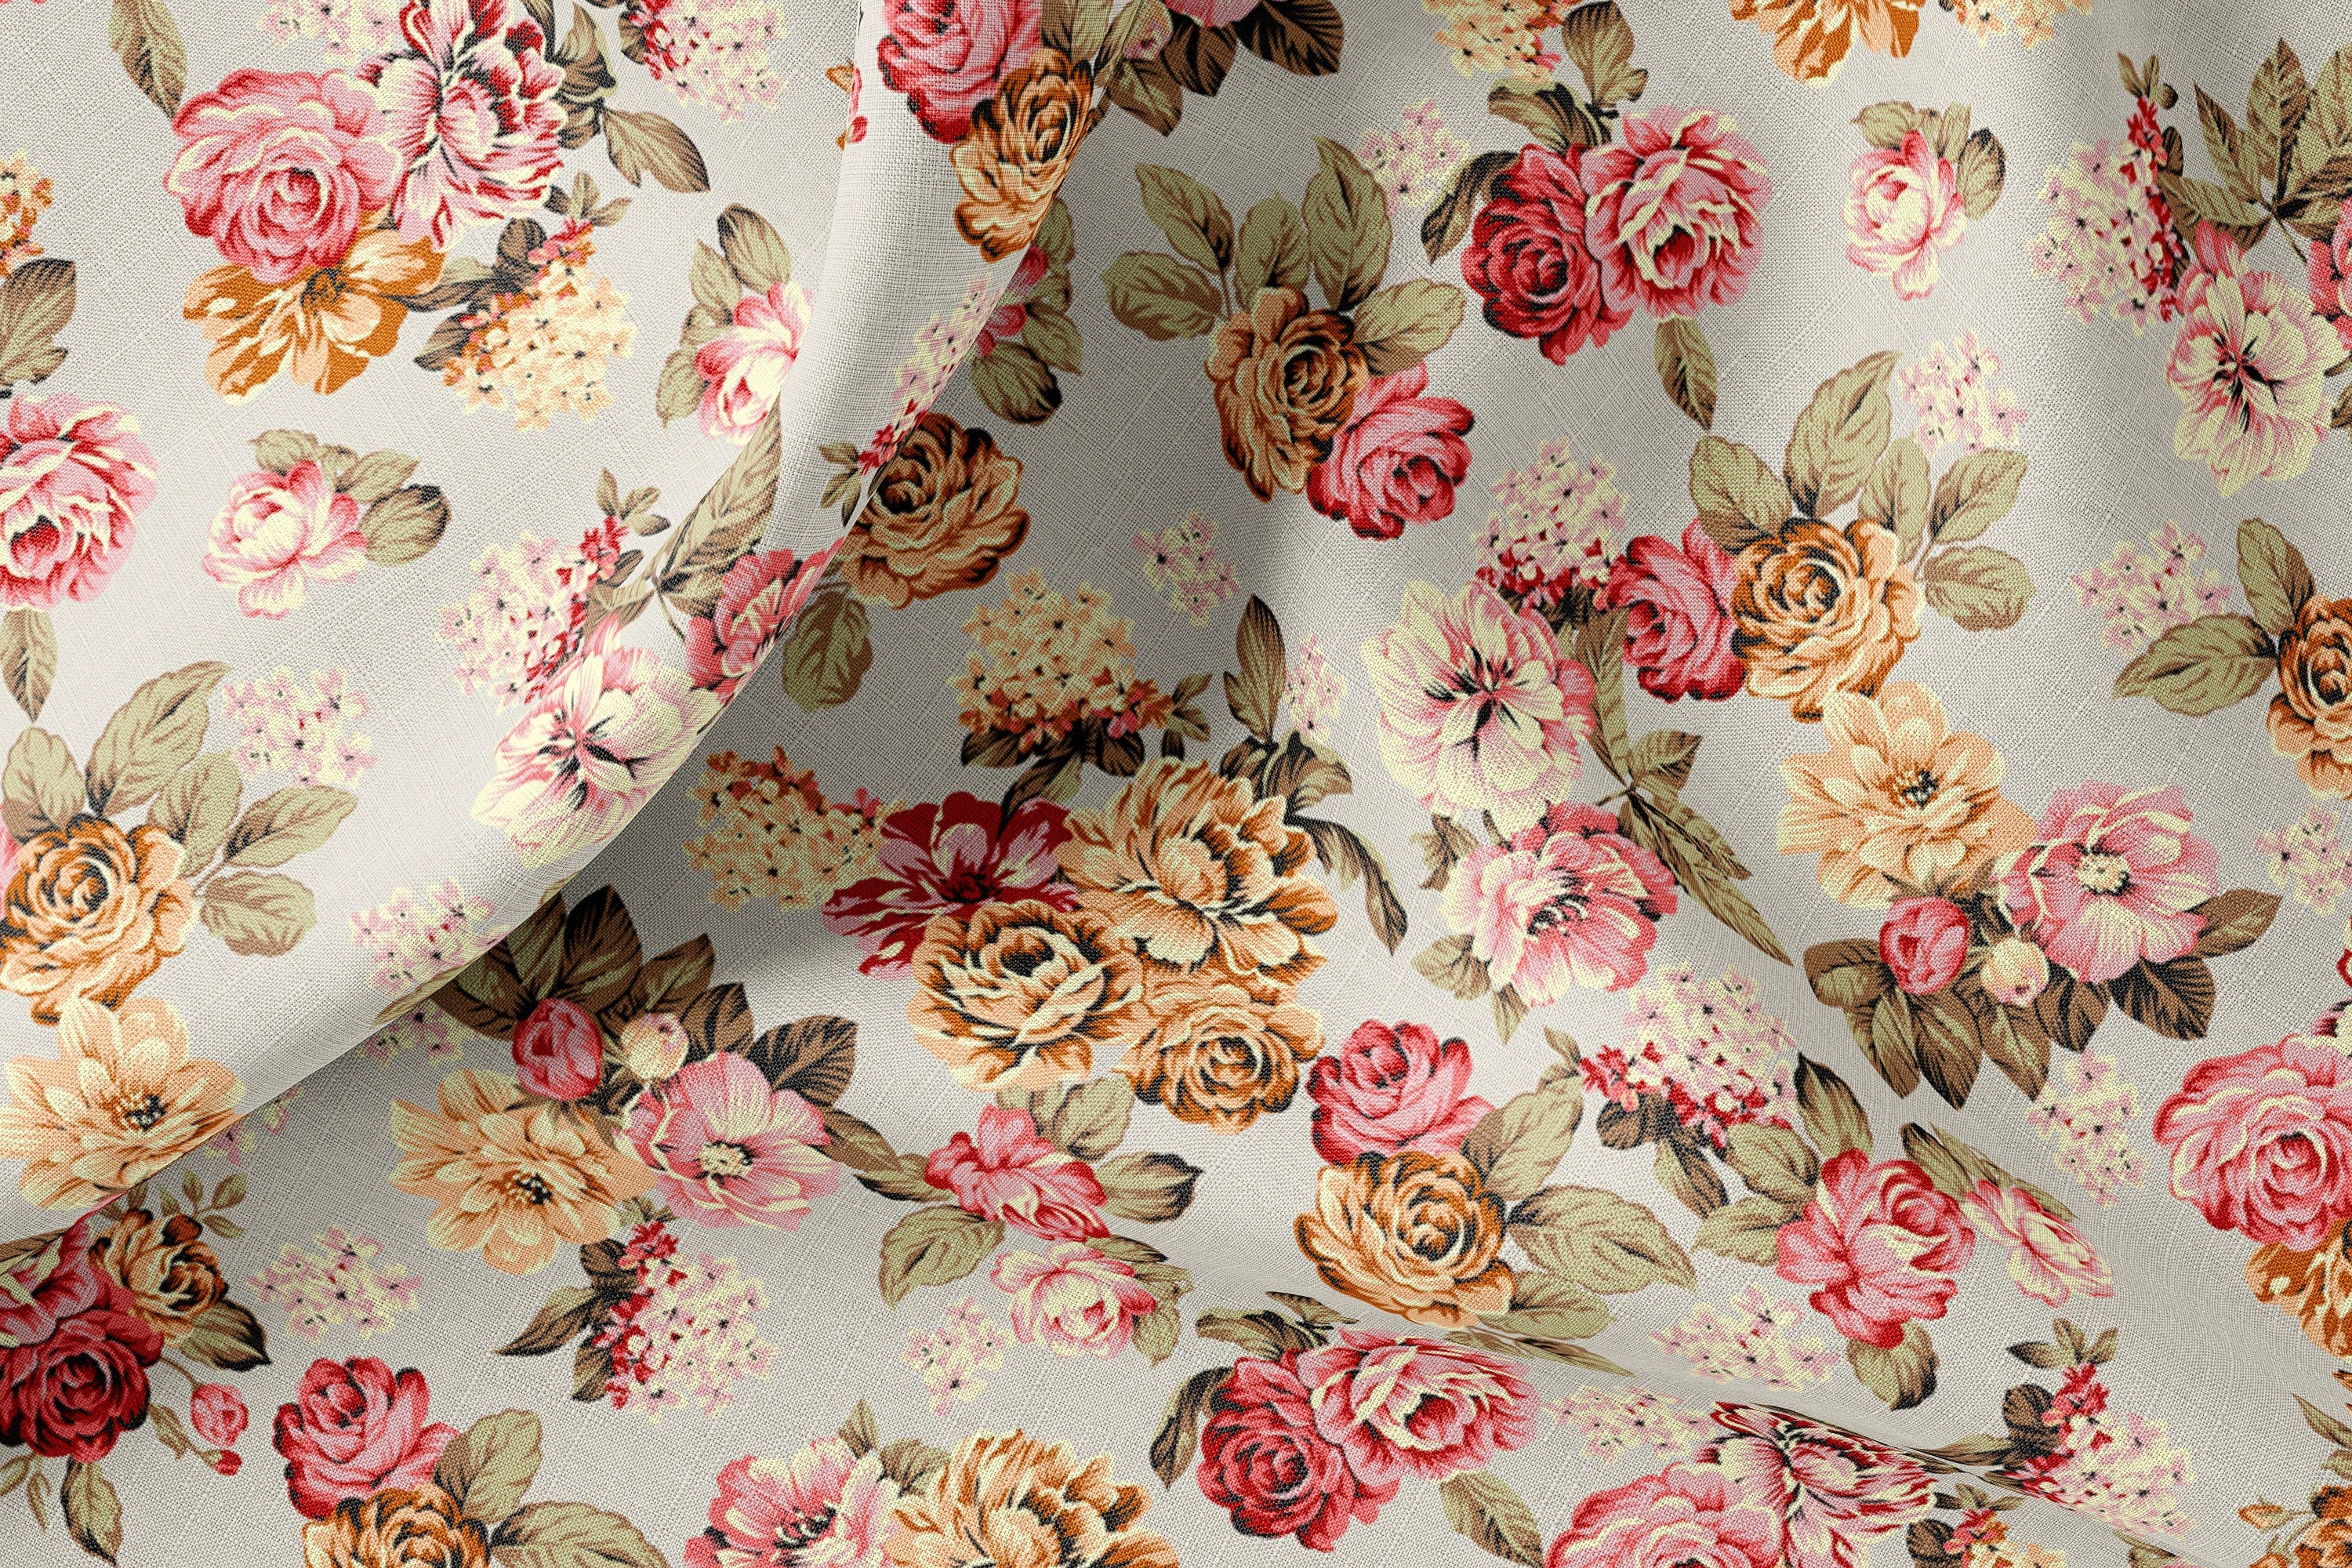 Vintage-Inspired Fabric by the Yard